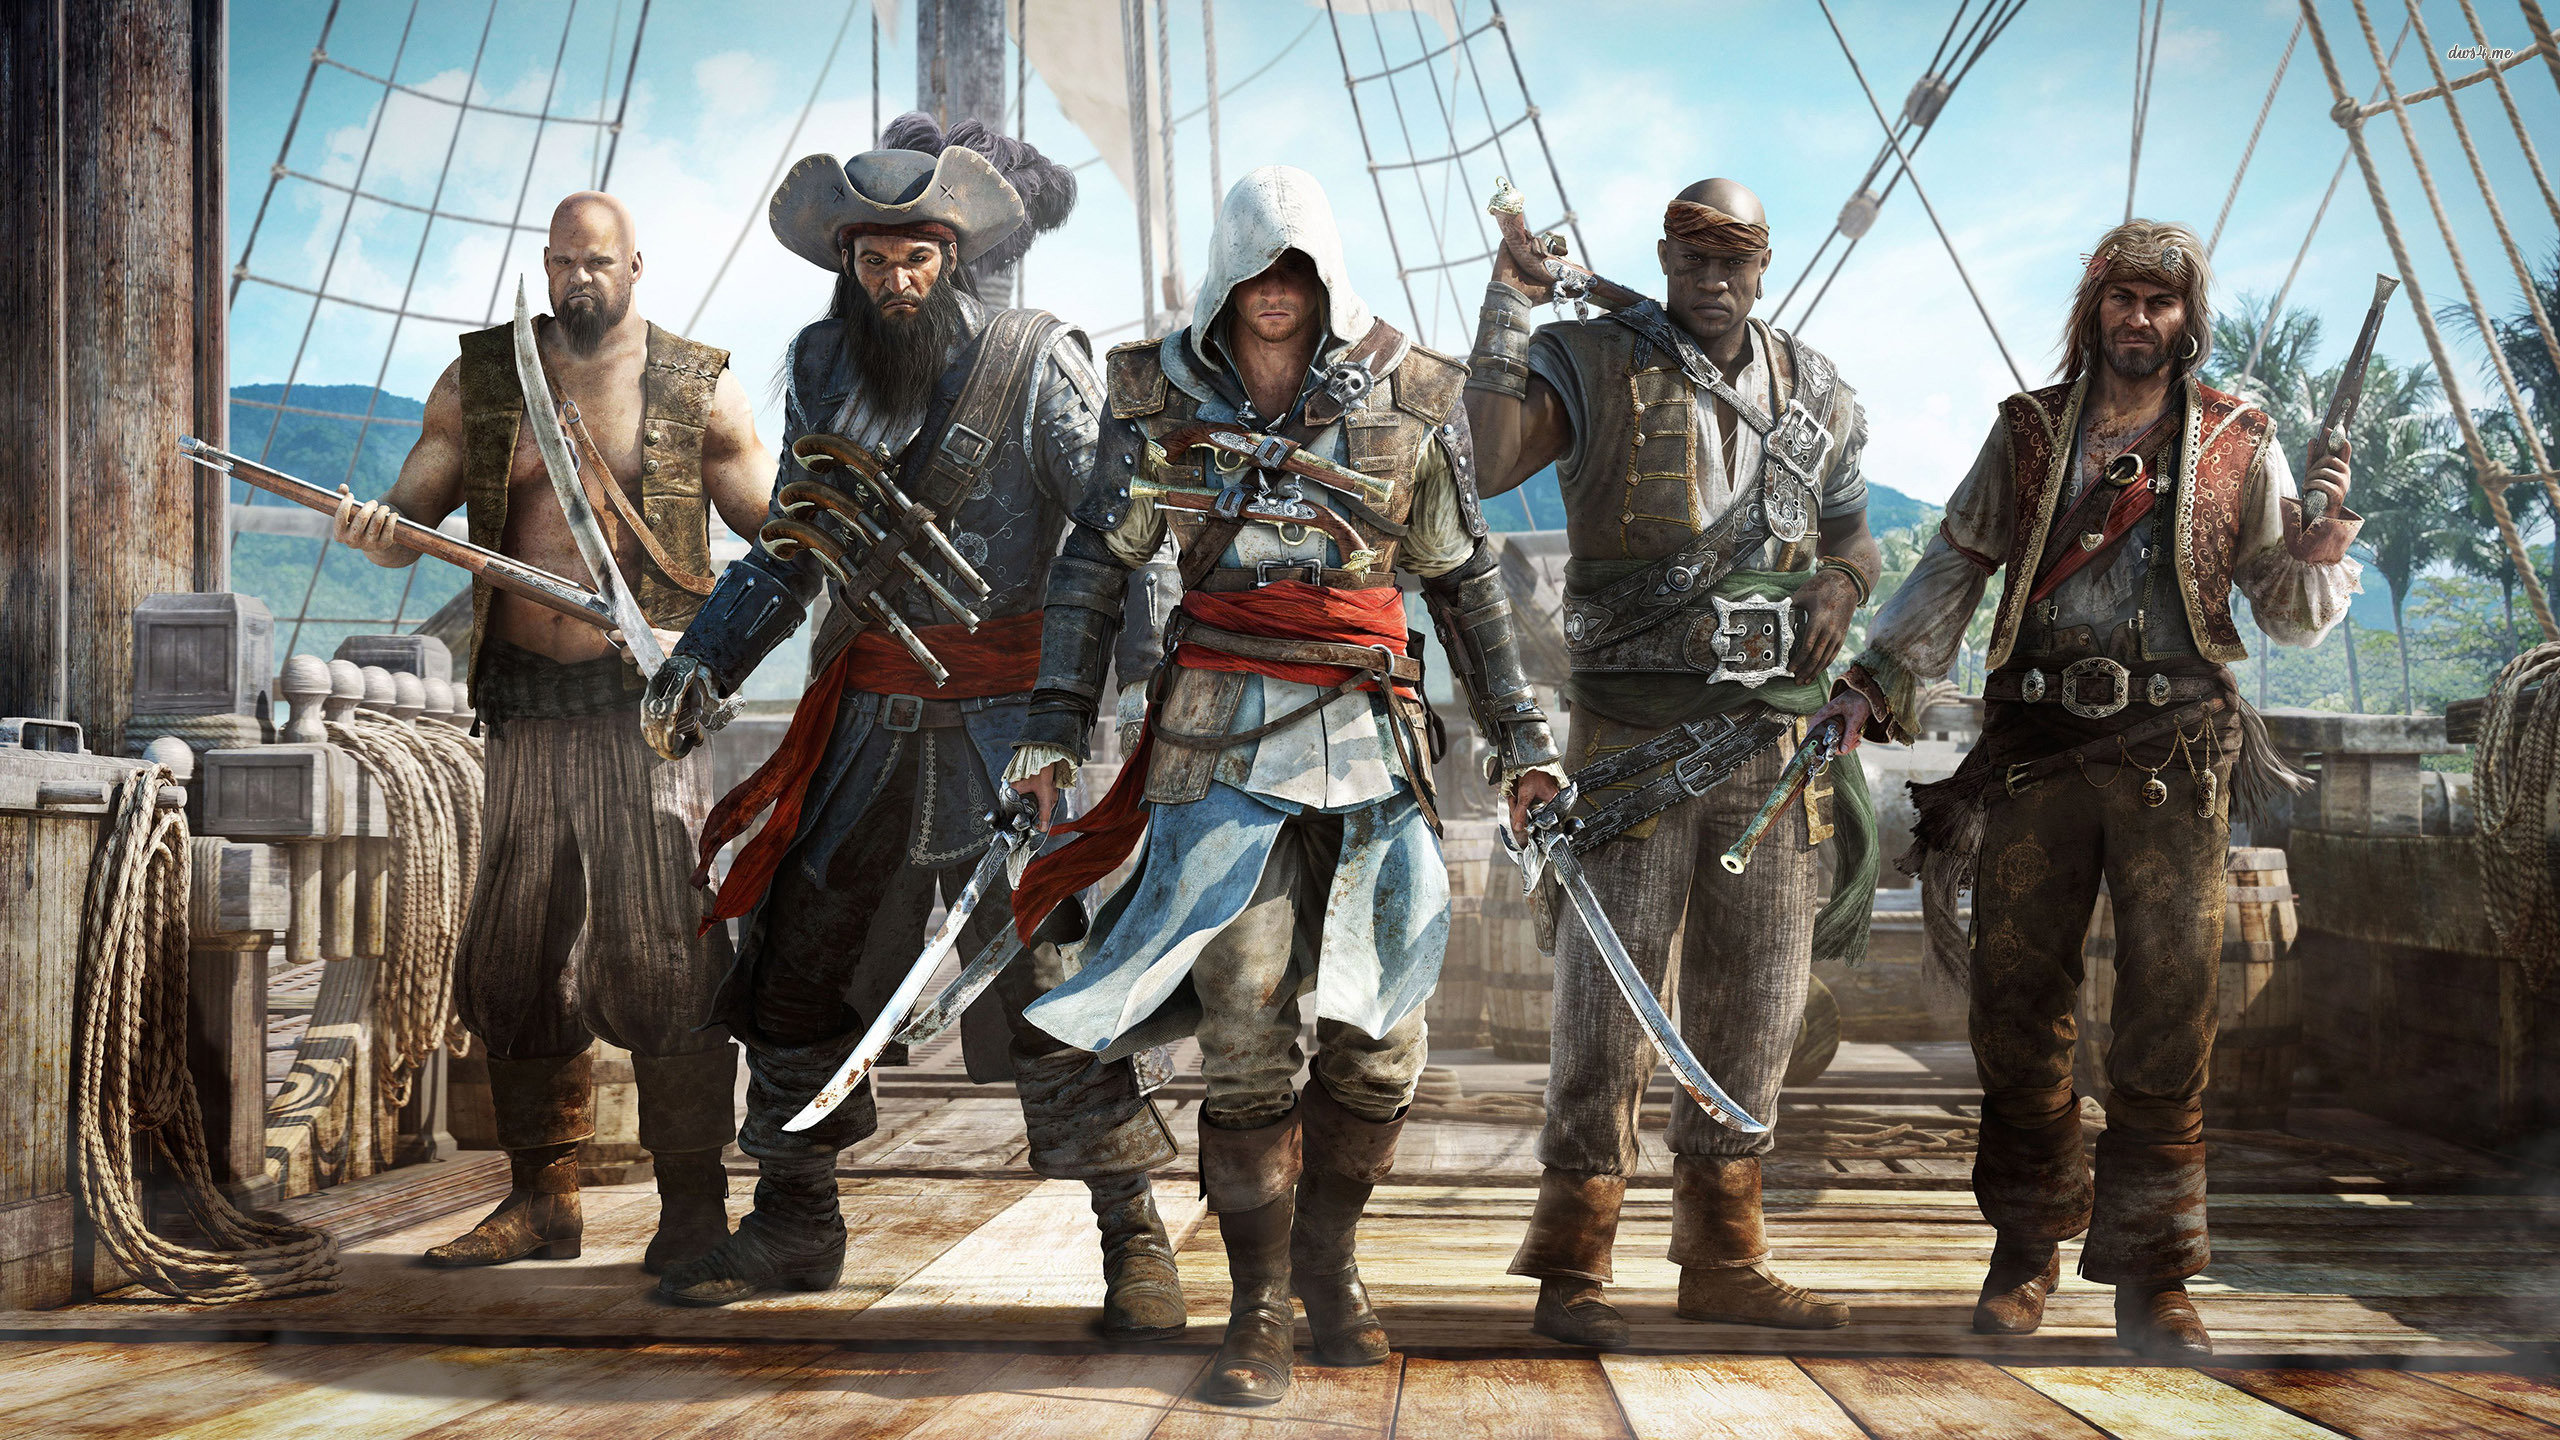 Awesome Assassin's Creed 4: Black Flag free wallpaper ID:234542 for hd 2560x1440 desktop